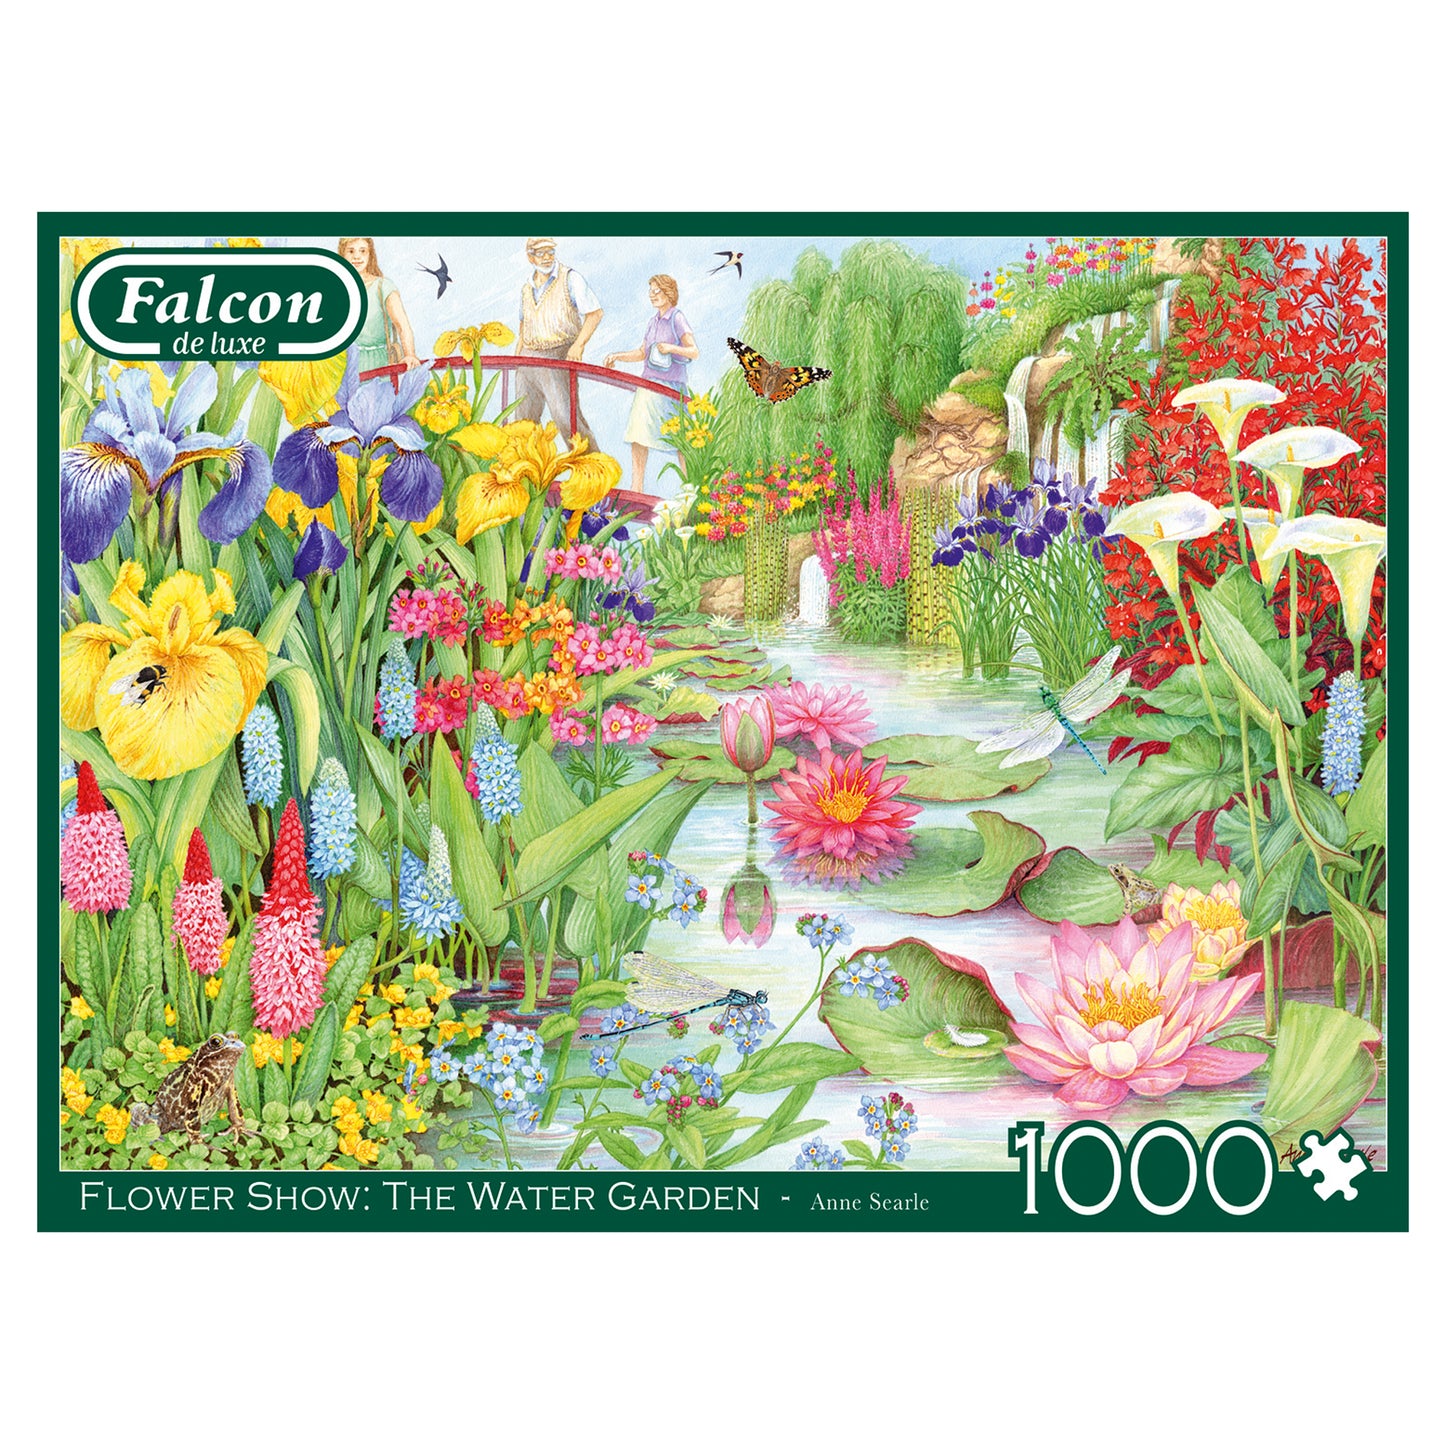 Falcon - Flower Show: The Water Garden (1000 pieces) - product image - Jumboplay.com